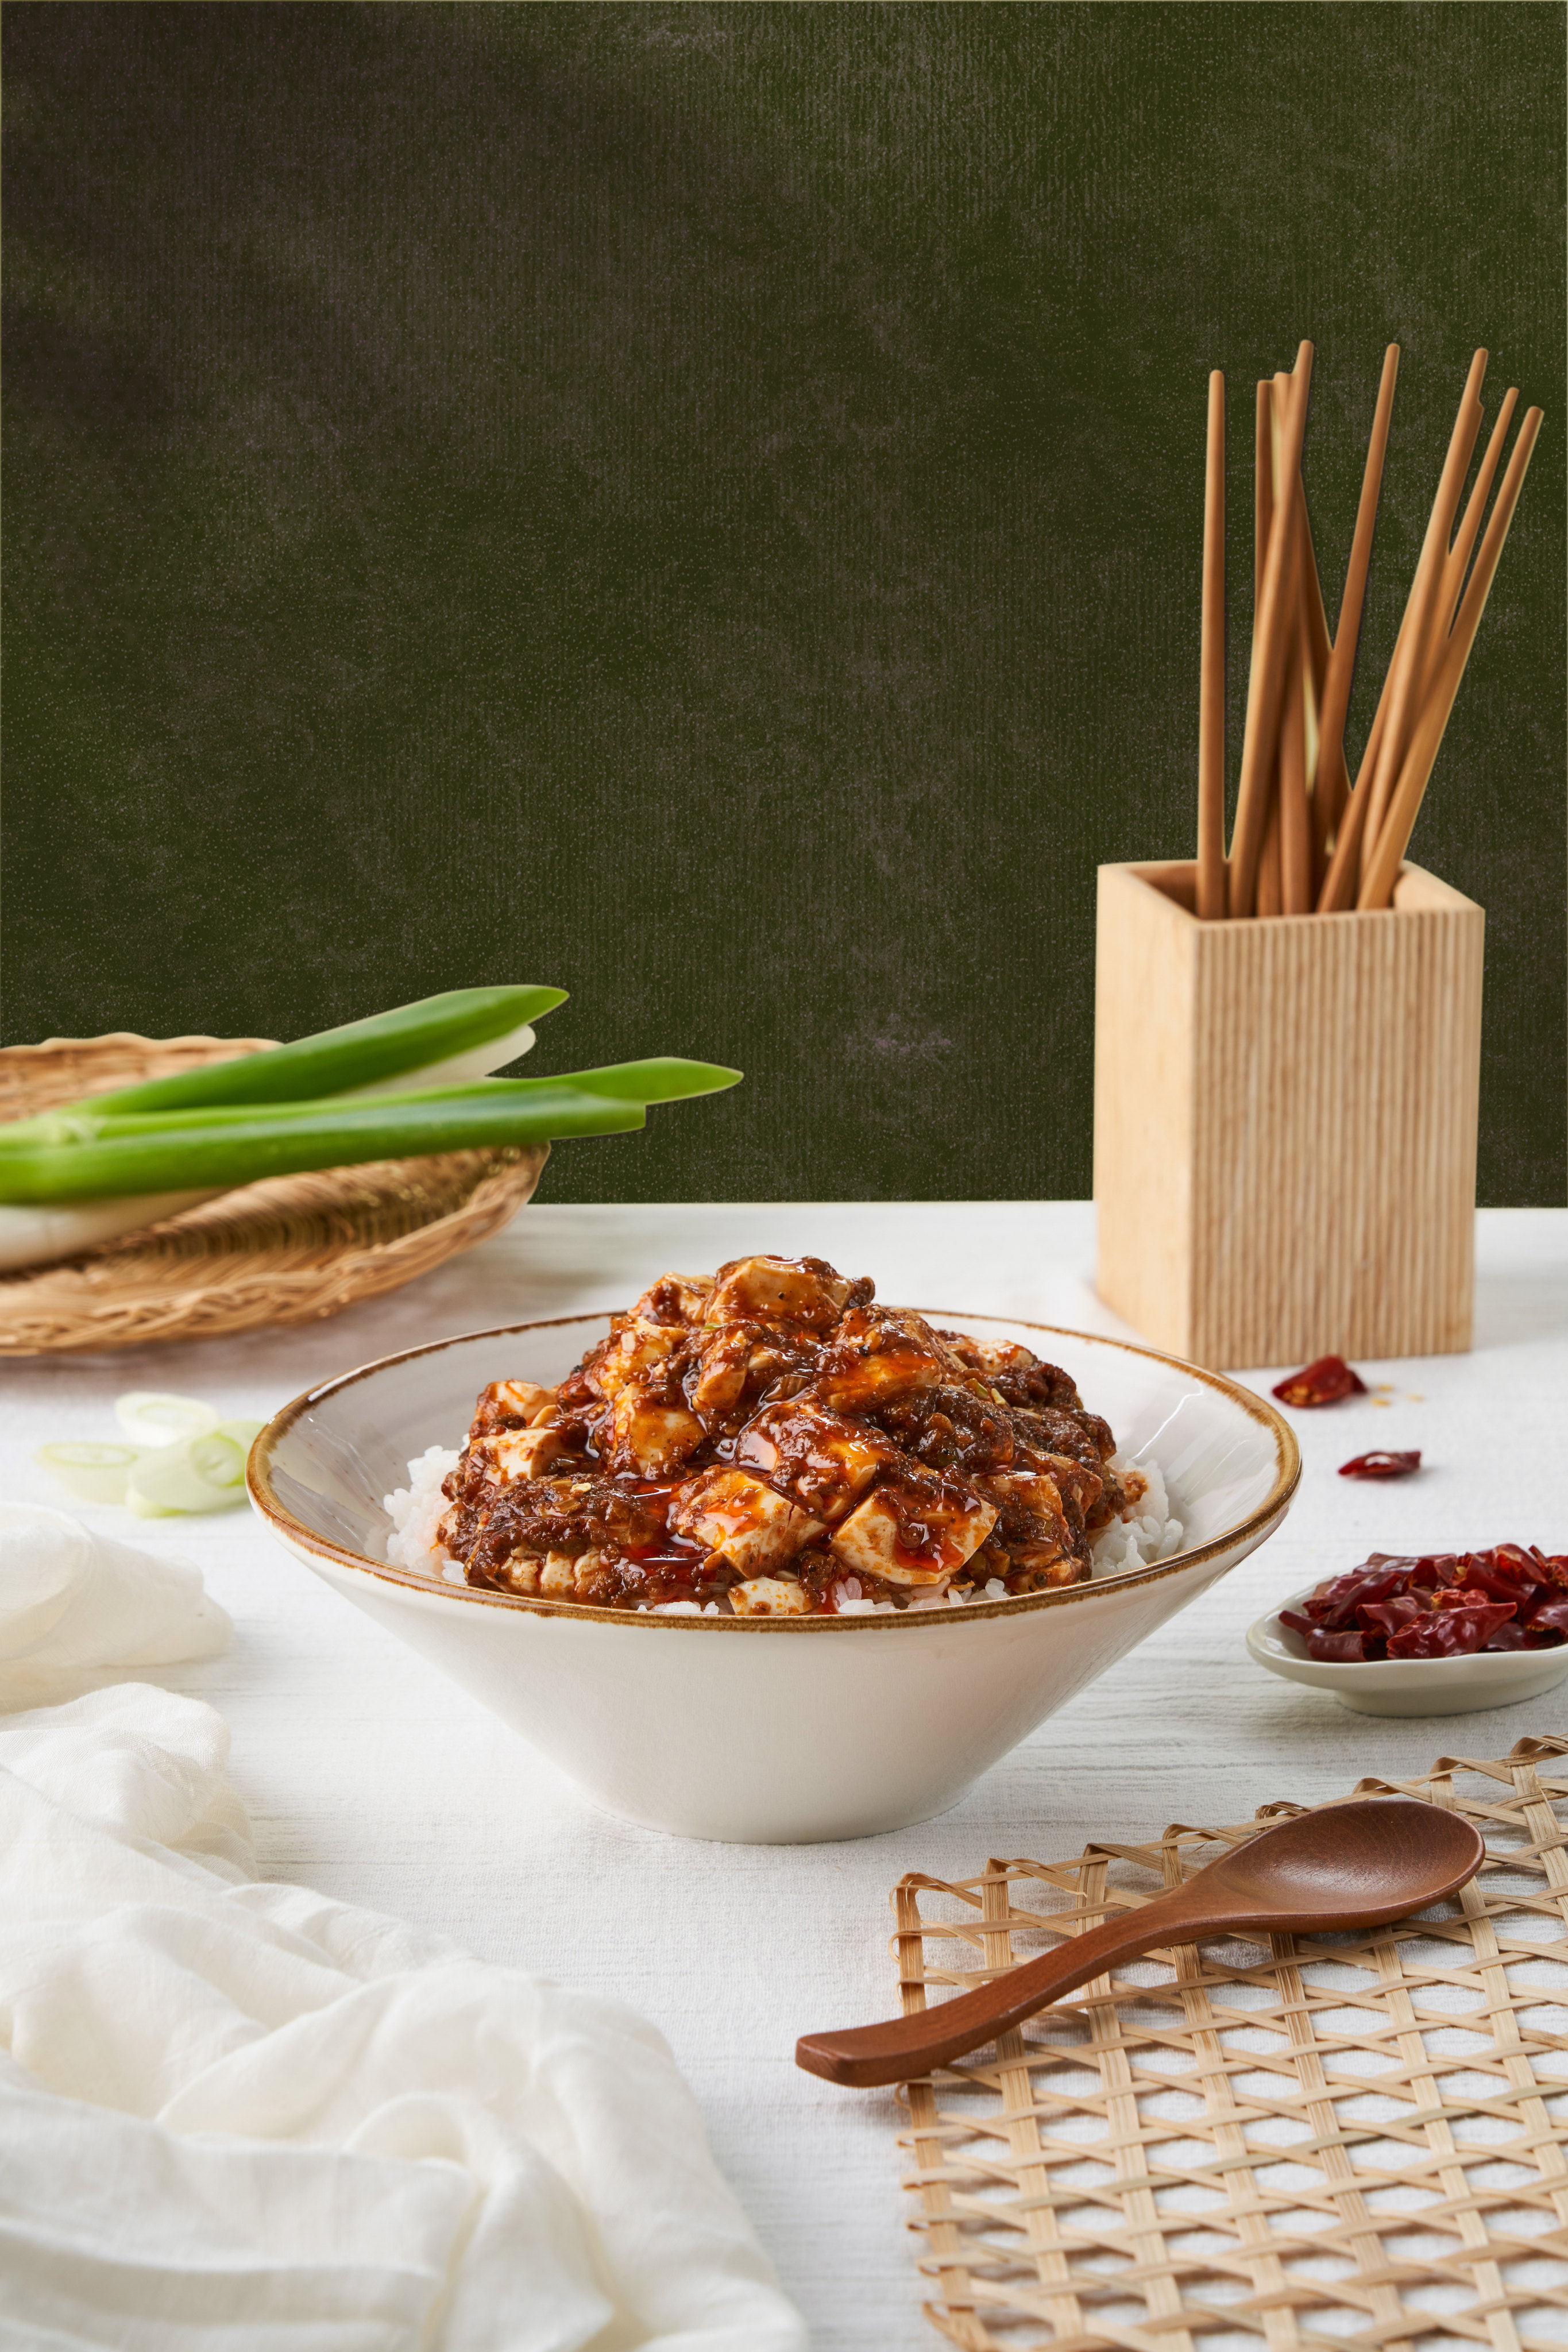 A bowl of mapo don at Chatterbox Express. The Singaporean chain has partnered with Chen’s Mapo Tofu to bring several Japanese-adapted Sichuan to Hong Kong, including dan dan noodles and popcorn chicken. Photo: Chatterbox Express